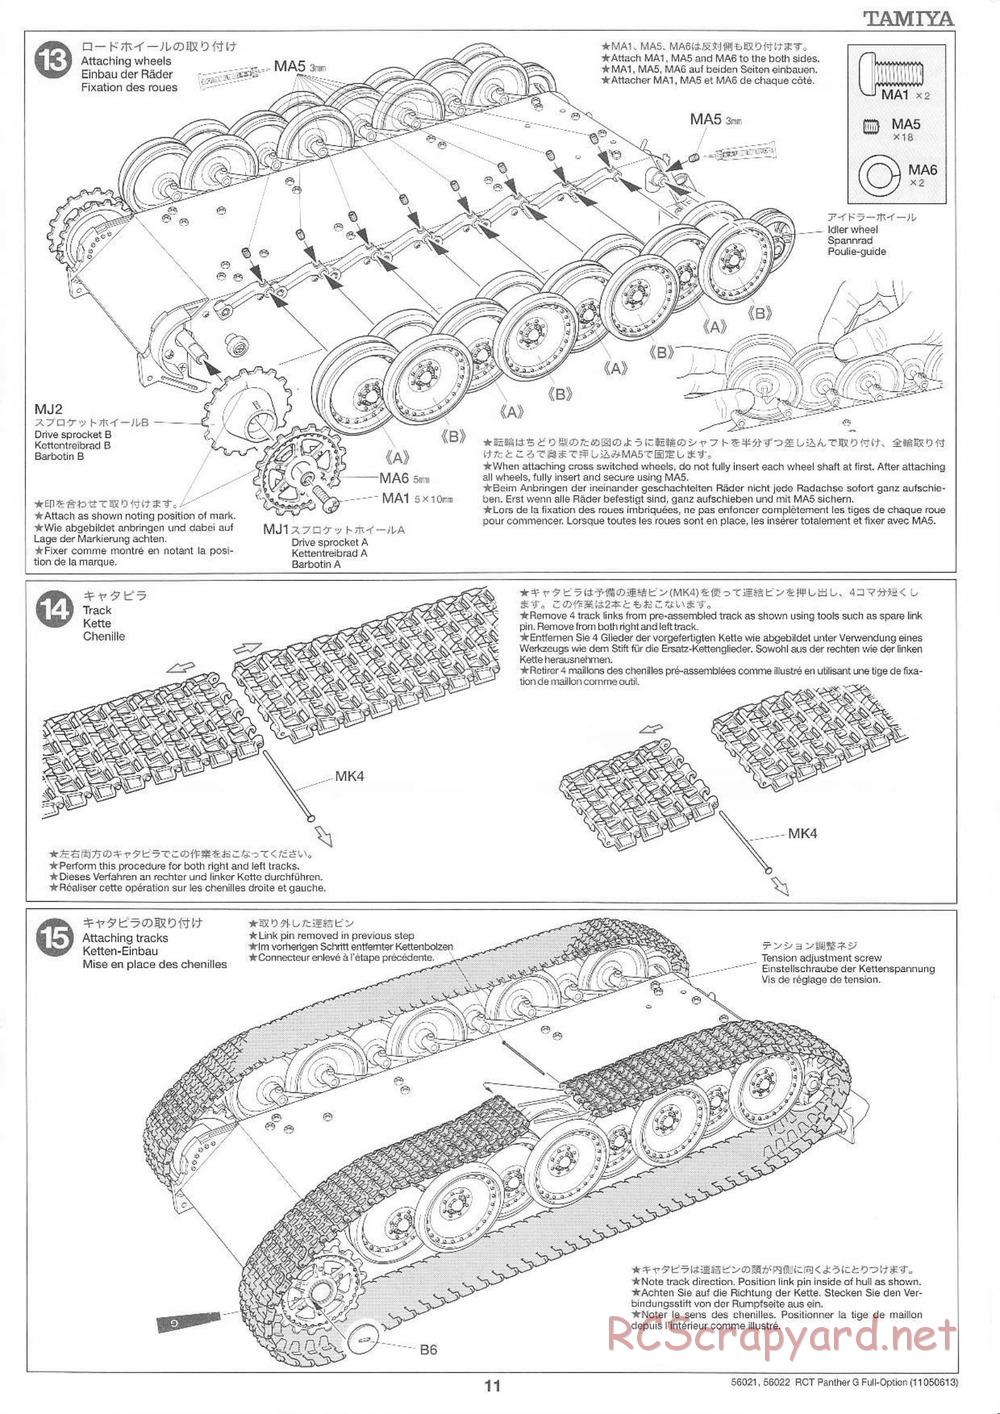 Tamiya - Panther Type G - 1/16 Scale Chassis - Manual - Page 11